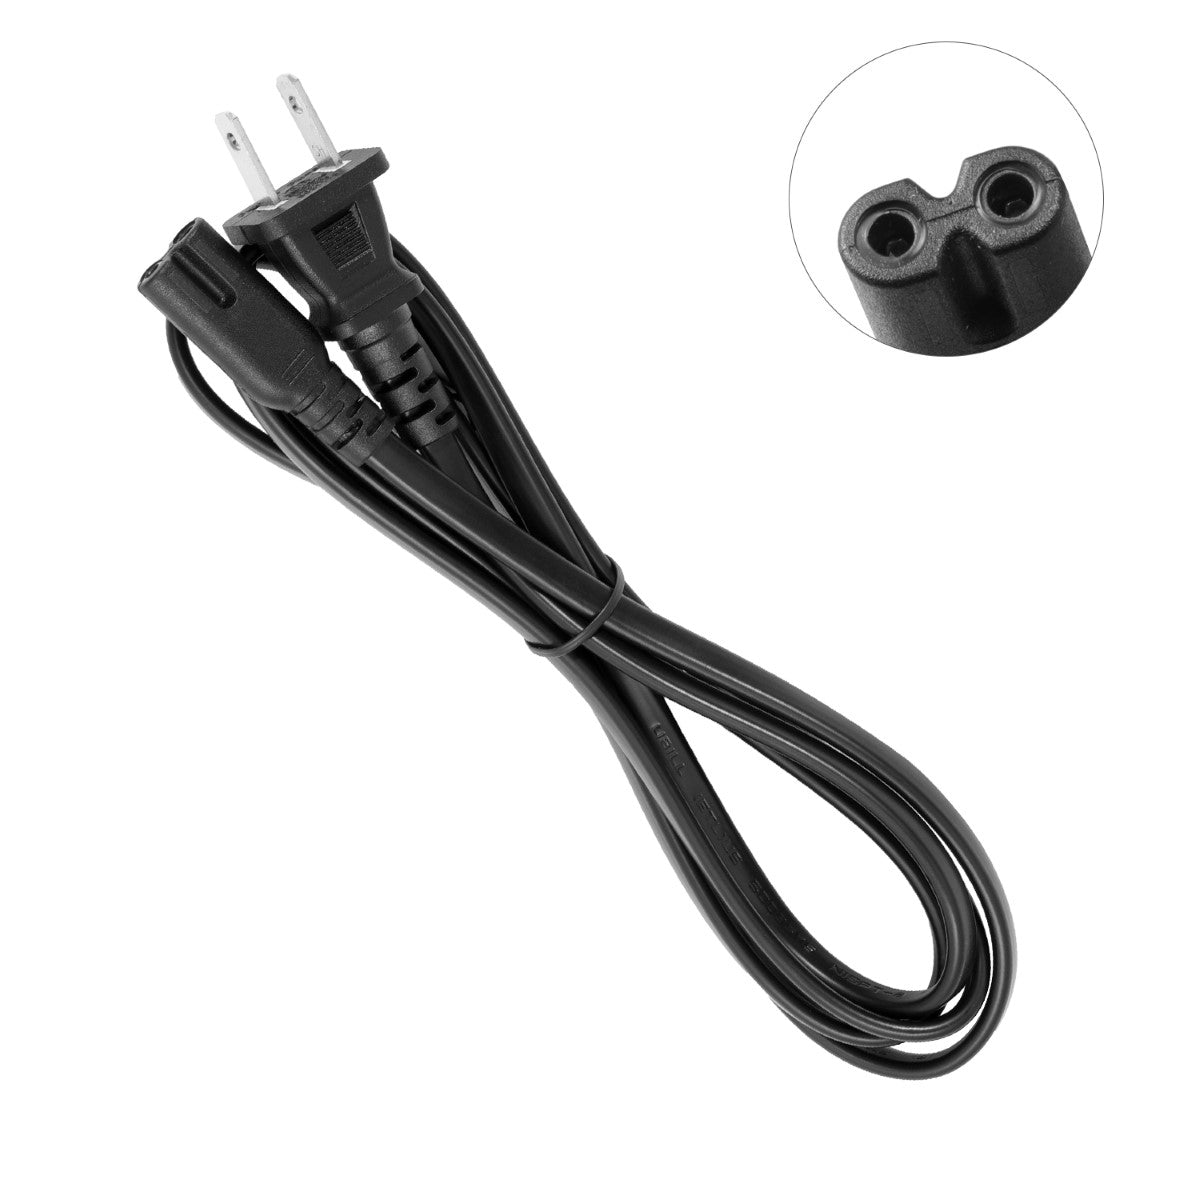 Power Cord for HP ENVY 120 e-All-in-One Printer.